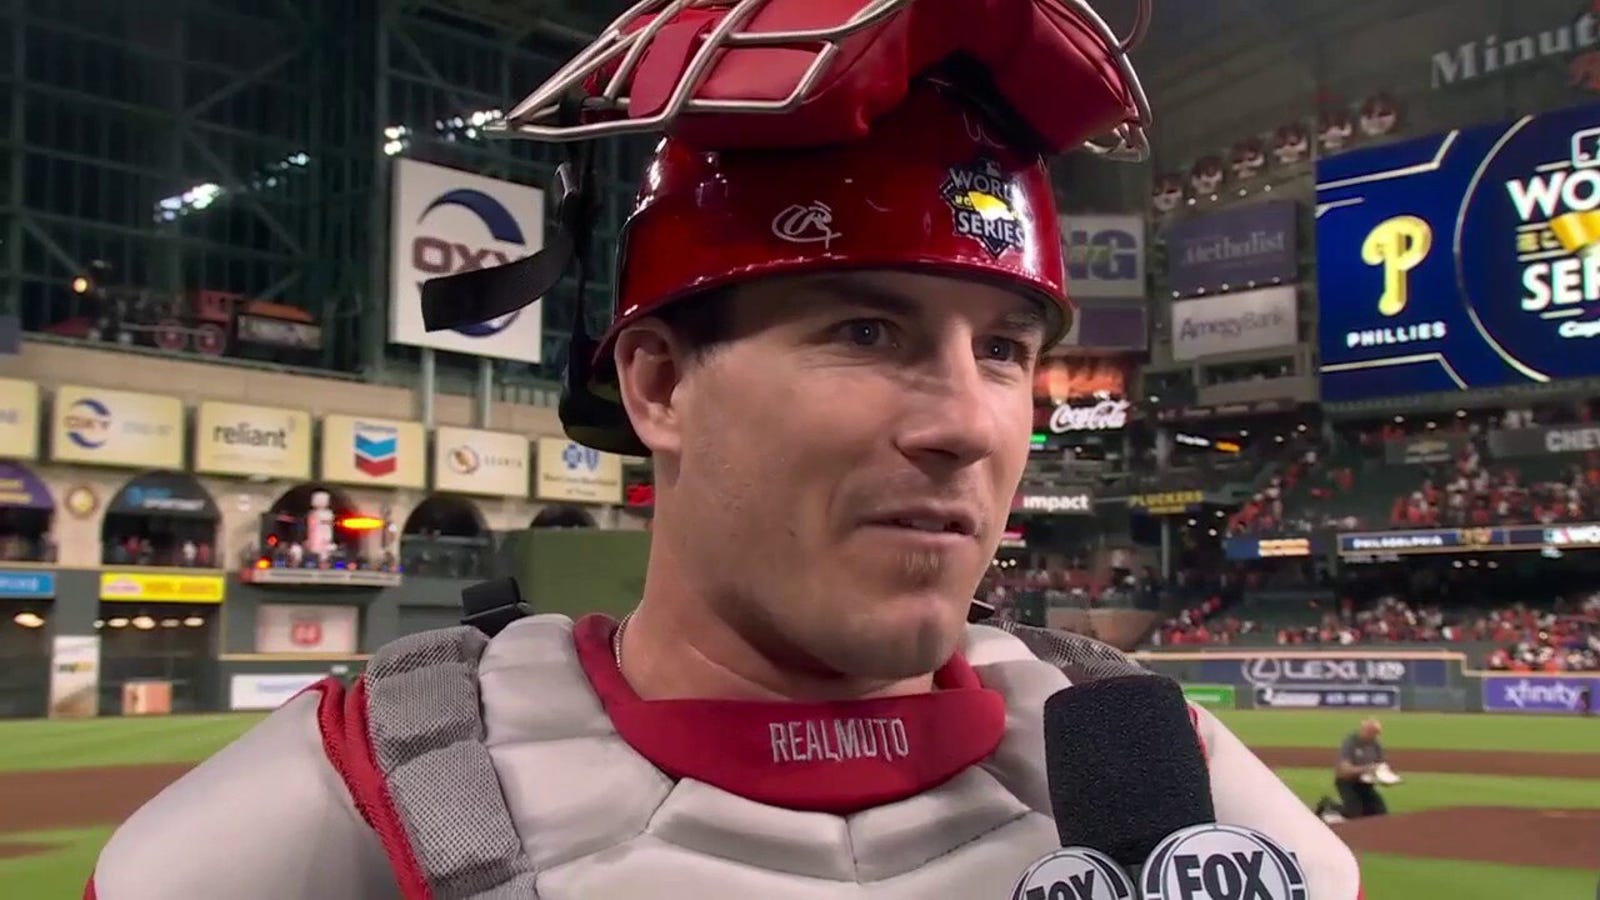 'That's a Phillies win right there' - J.T. Realmuto